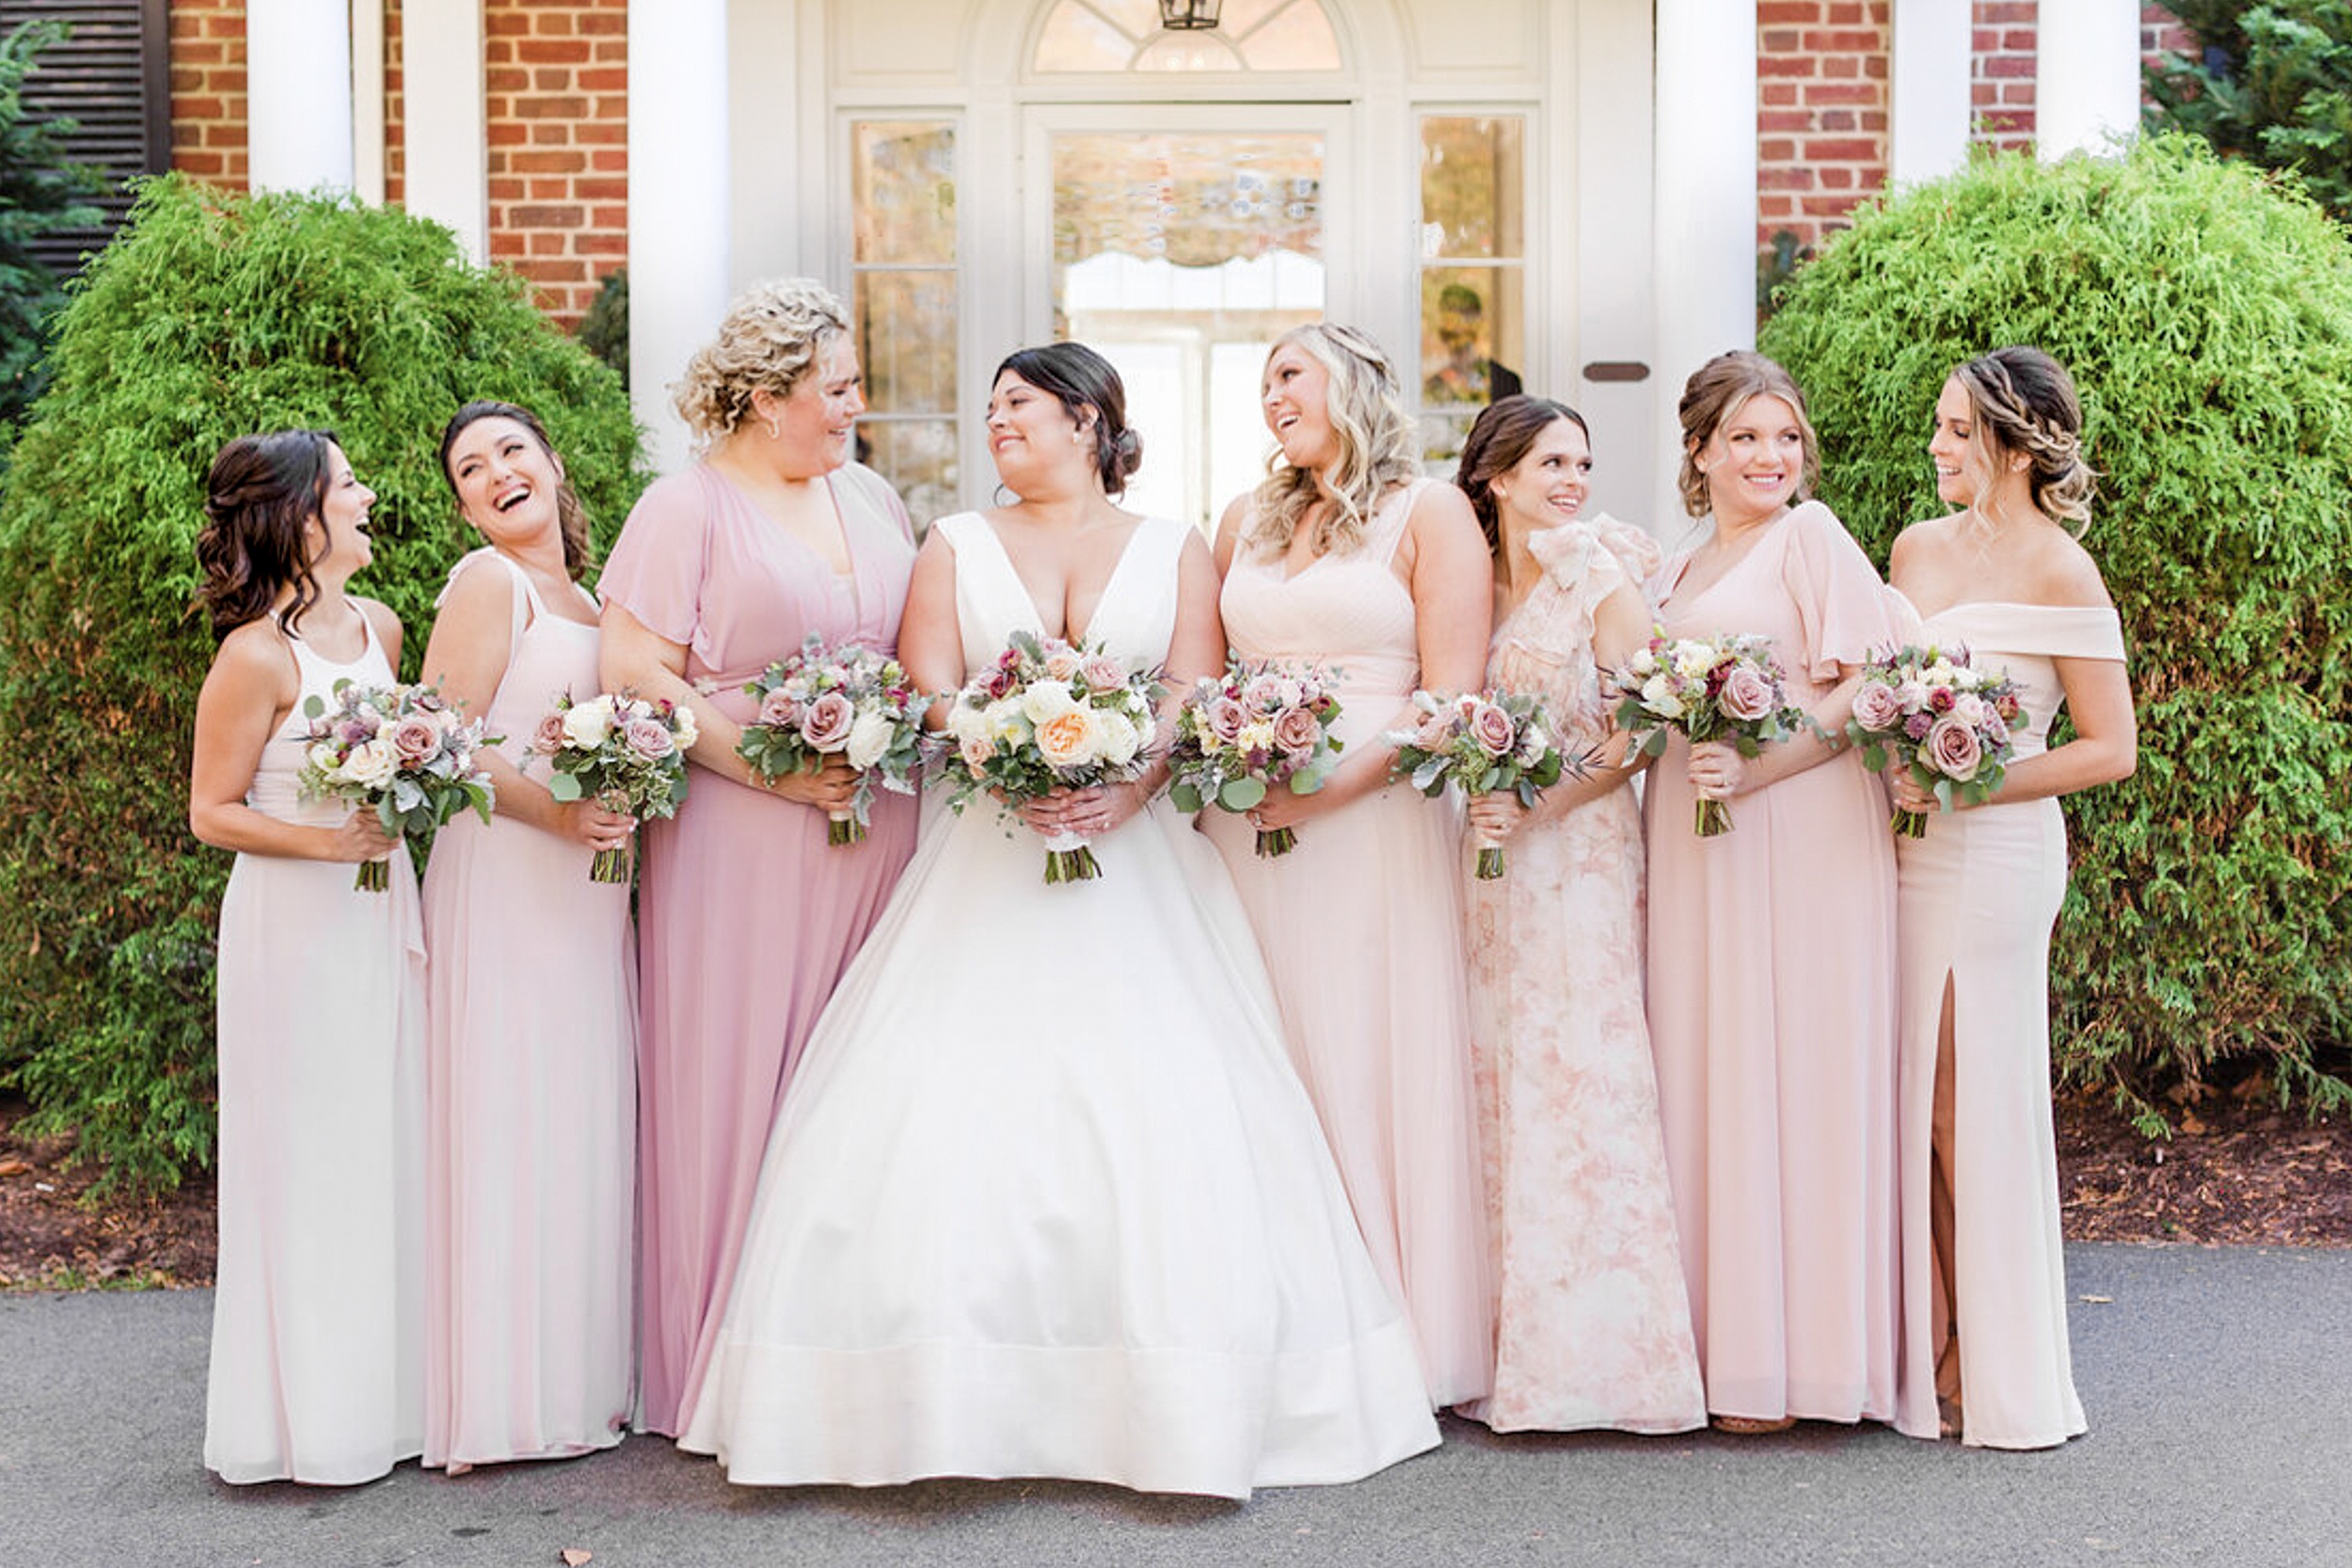 A bride stands at the front door of a brick building laughing with her bridesmaids